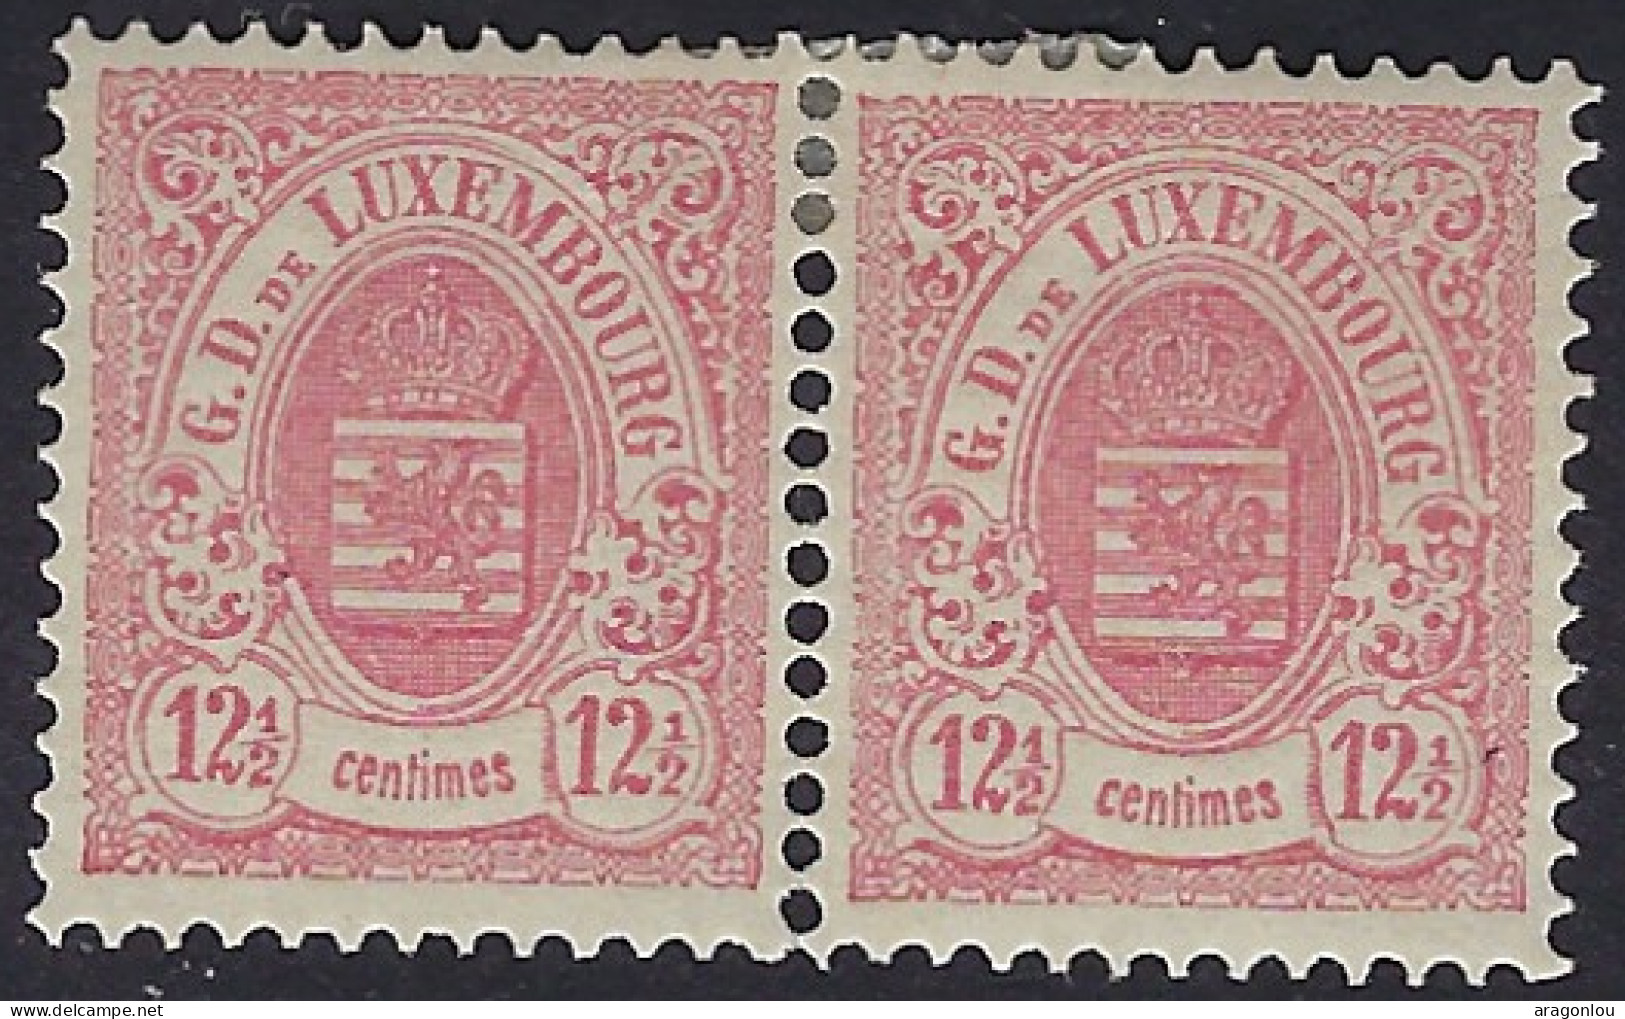 Luxembourg - Luxemburg - Timbres - Armoires 1880    12,5C.    *    1 Paire     Michel 41 D - 1859-1880 Armoiries